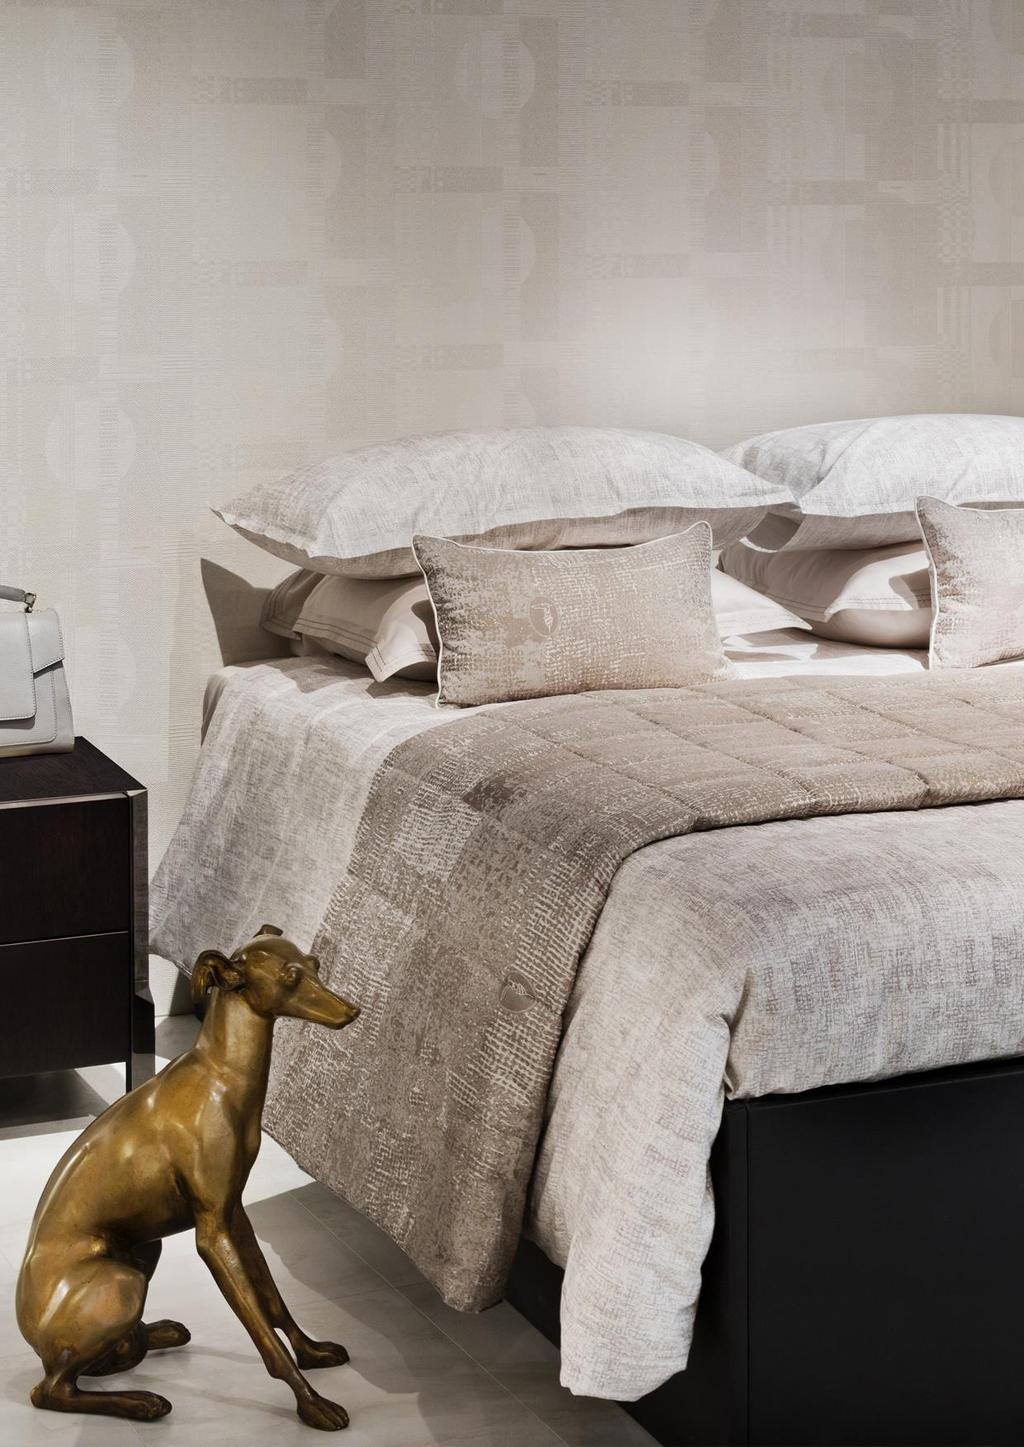 Trussardi Home Linen This home linen collection pays homage to the philosophy of the Trussardi brand,